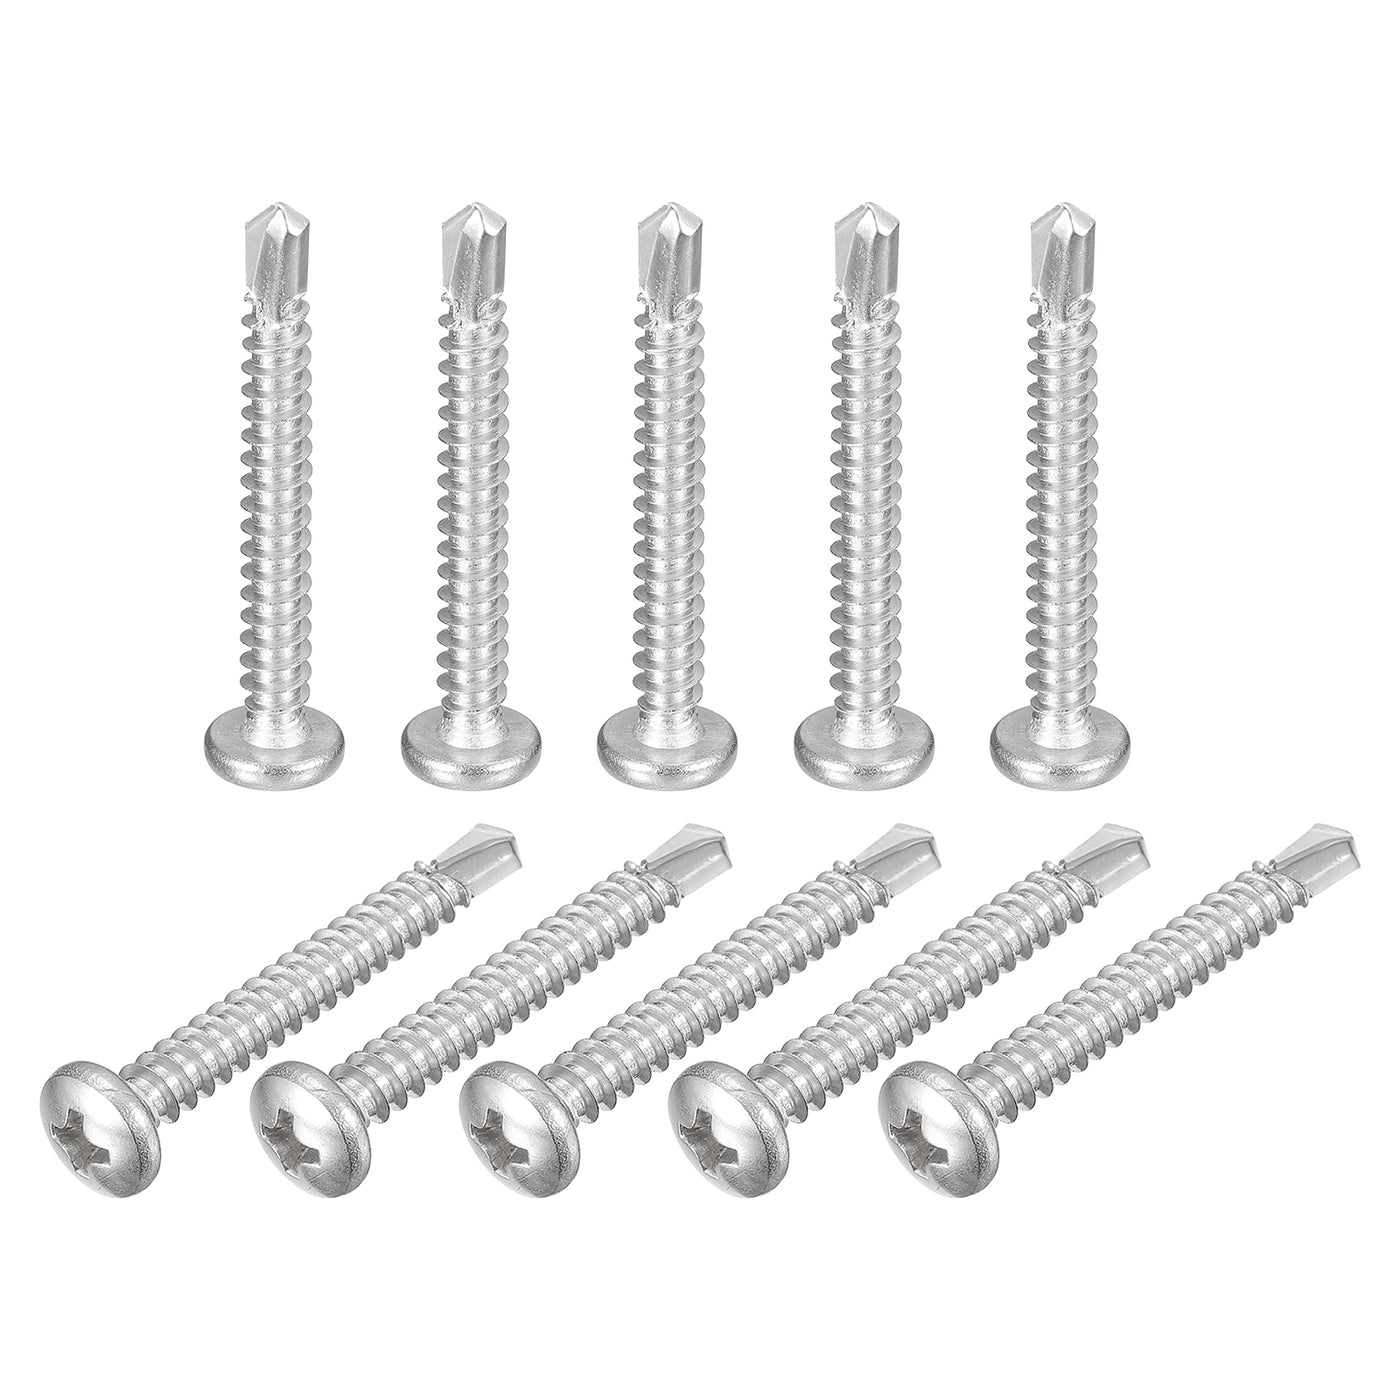 uxcell Uxcell #10 x 1-1/2" Self Drilling Screws, 20pcs Phillips Pan Head Self Tapping Screws